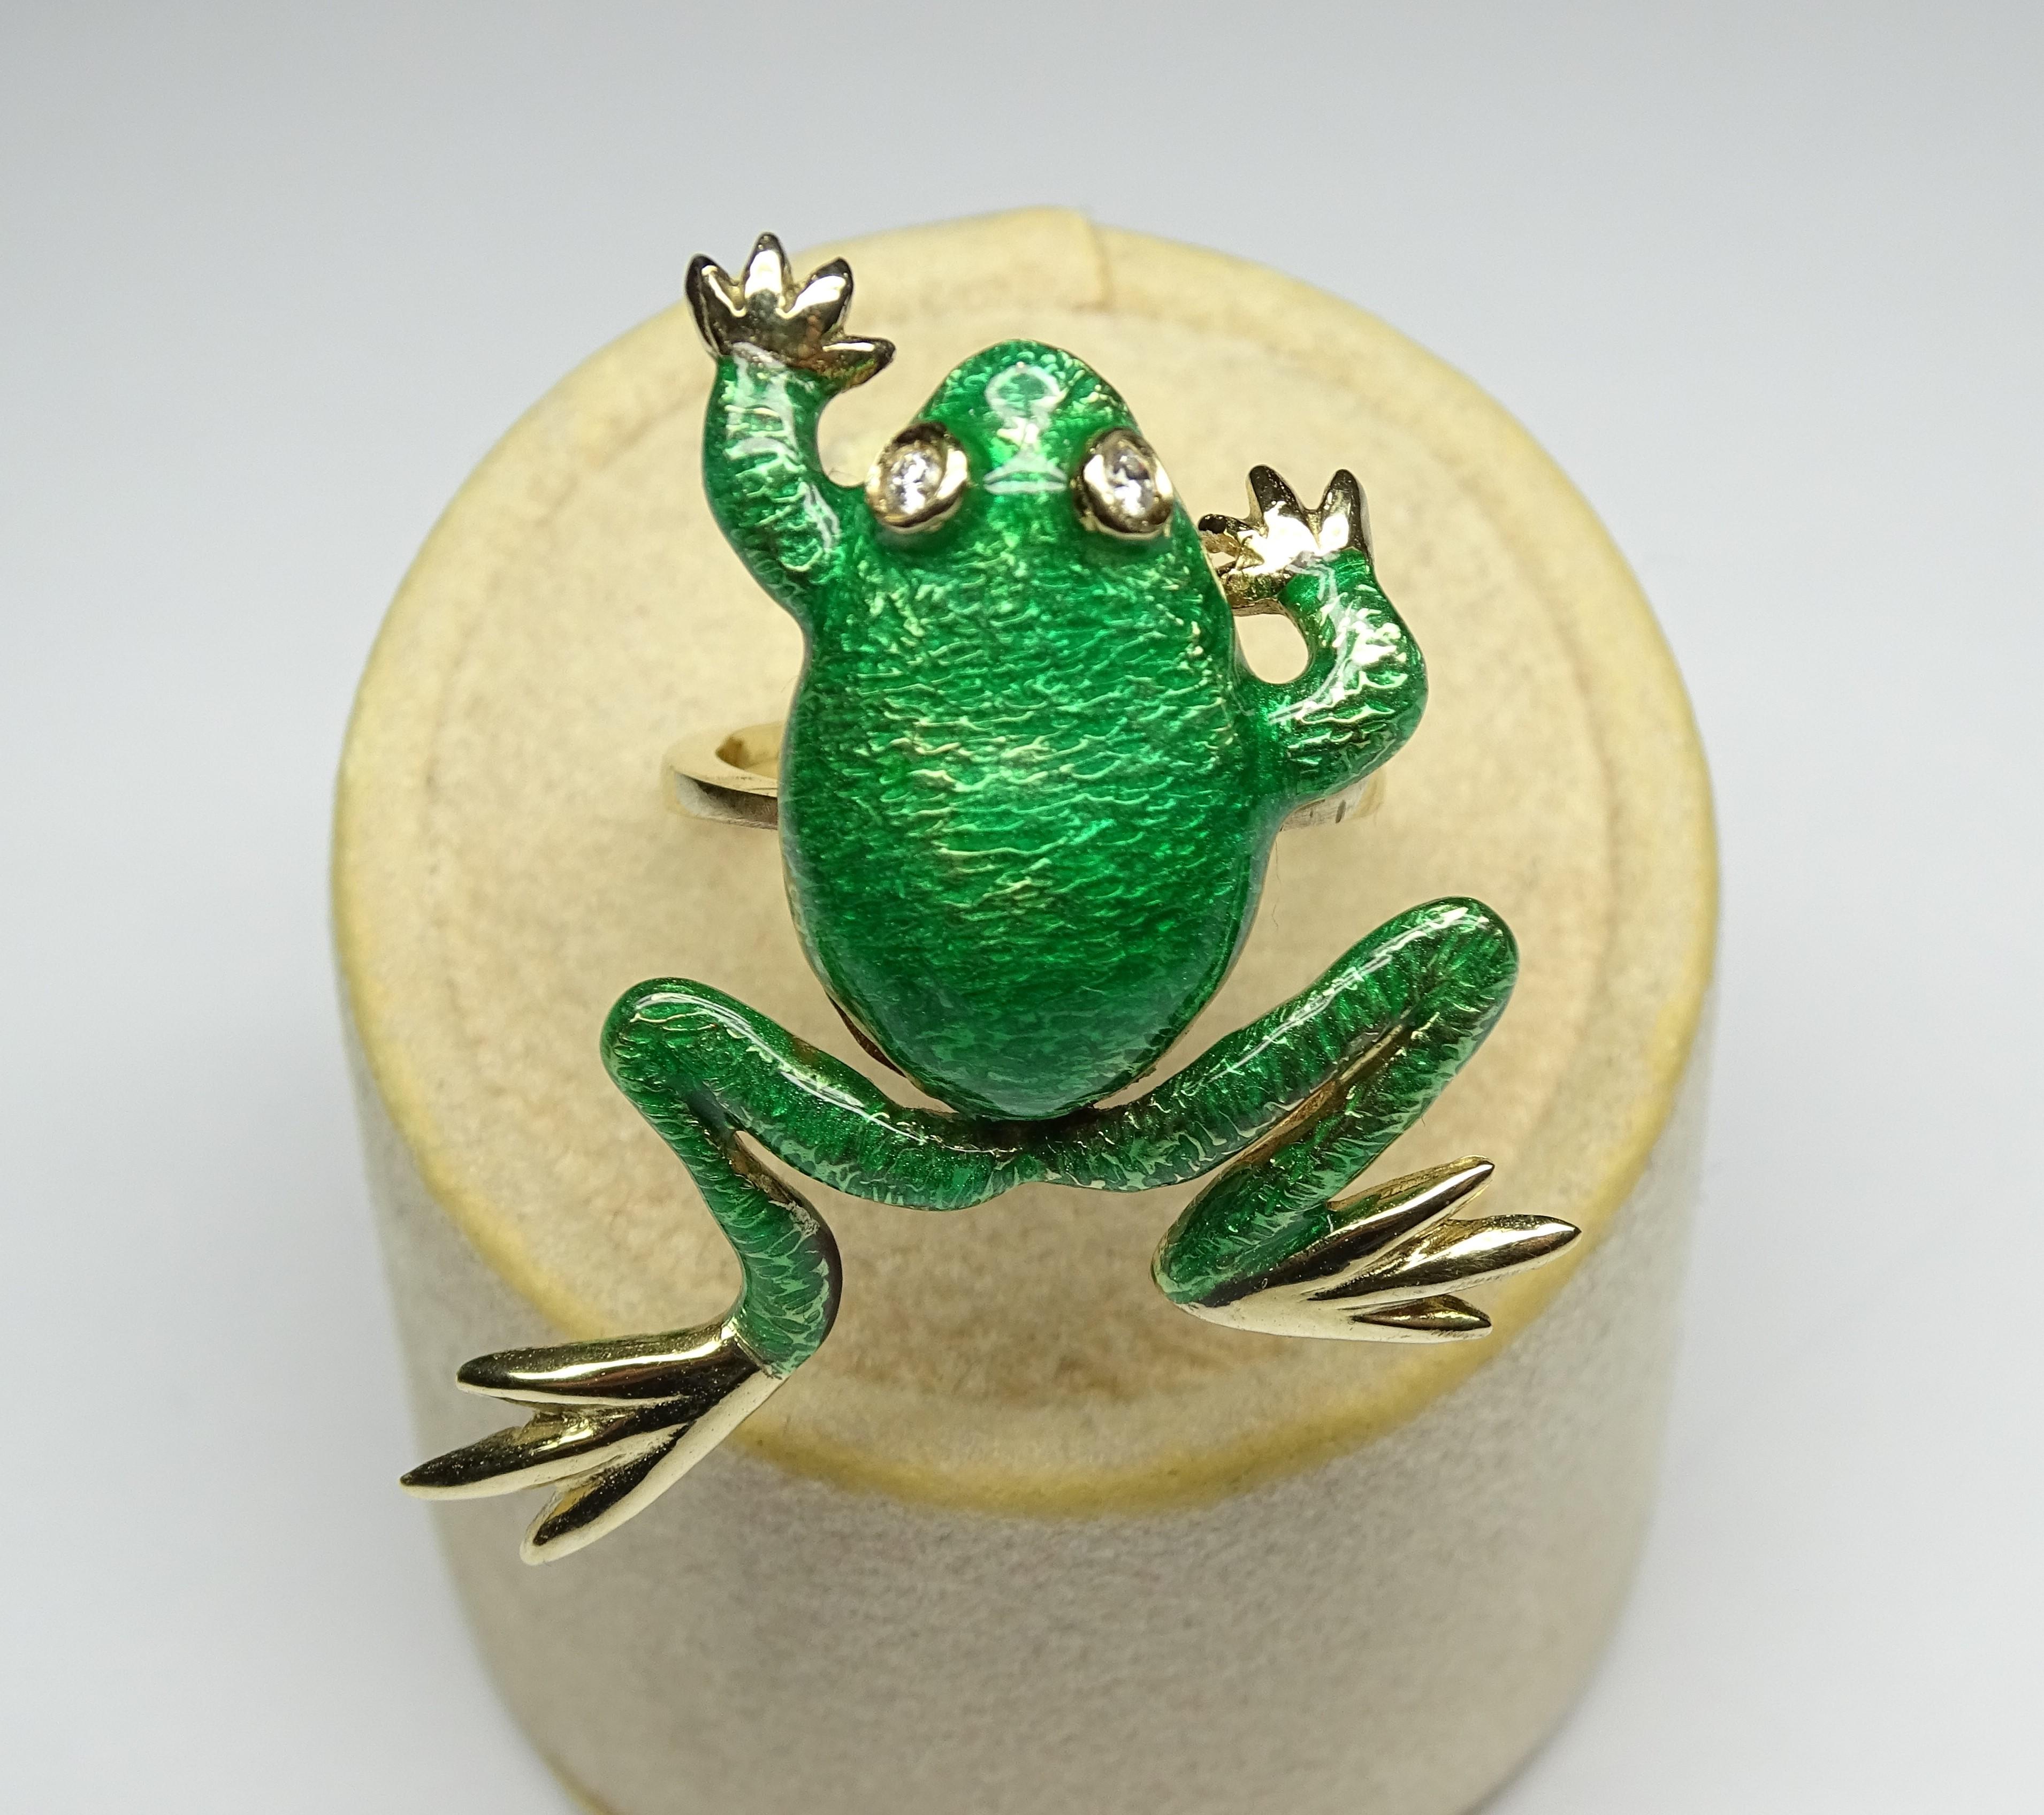 This Ring is made of 14K Yellow Gold.
This Ring has 0.06 Carats of Round Cut White Diamonds.
This Ring has Green Enamel. The frog's legs move.
This Ring is inspired by Art Nouveau.
Size ITA: 14.5 - Size USA: 7
We're a workshop so every piece is